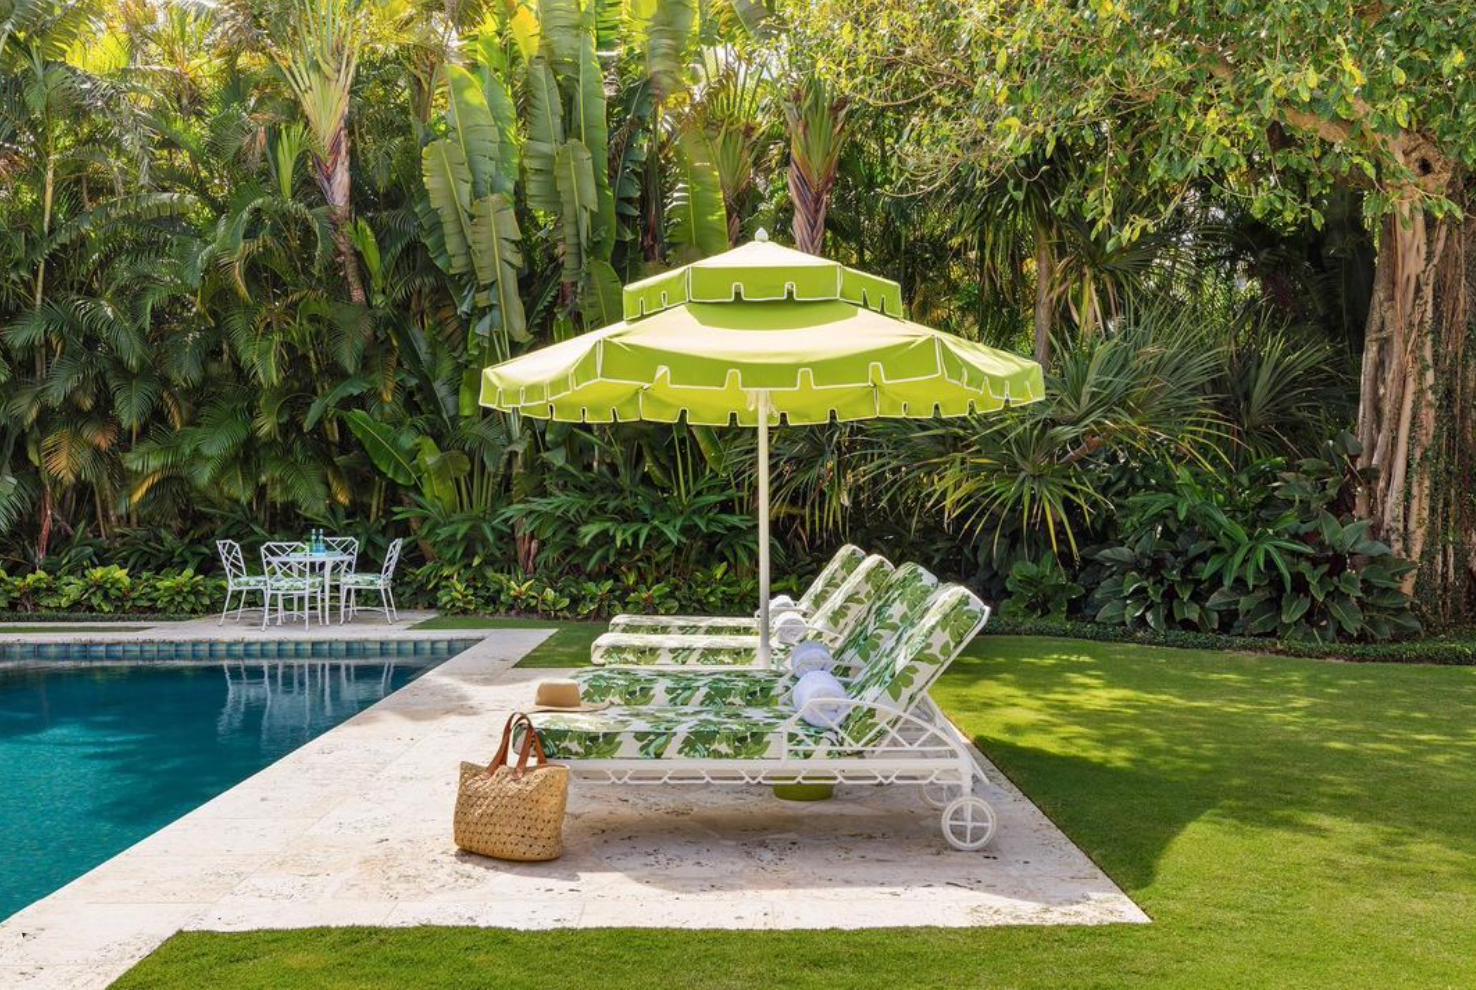 Image of umbrella and outdoor furniture